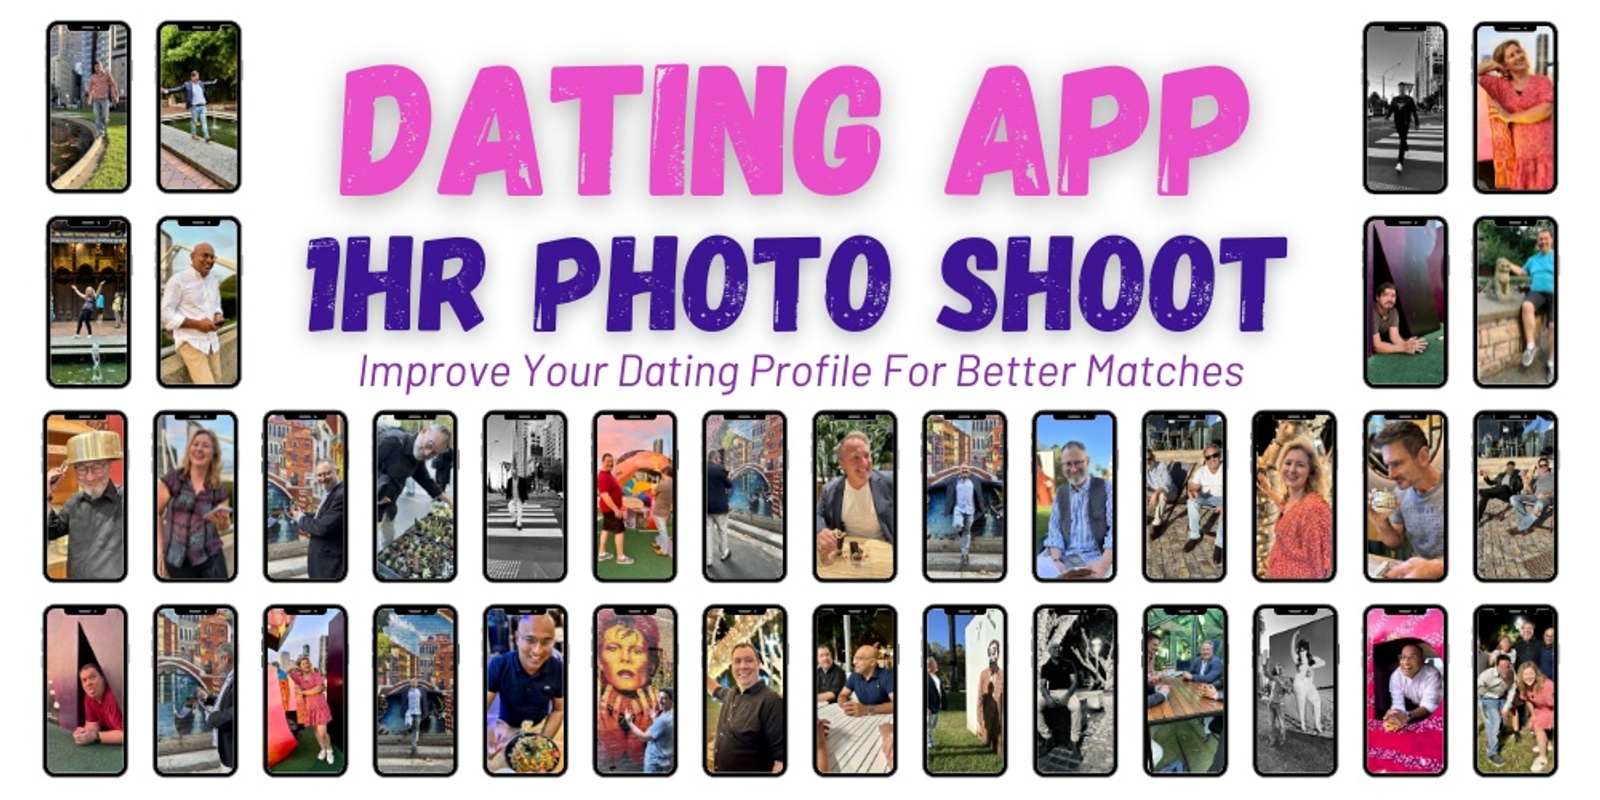 Banner image for Dating App 1 hr Photo Shoot | Improve Your Dating Profile For Better Matches (Melbourne)